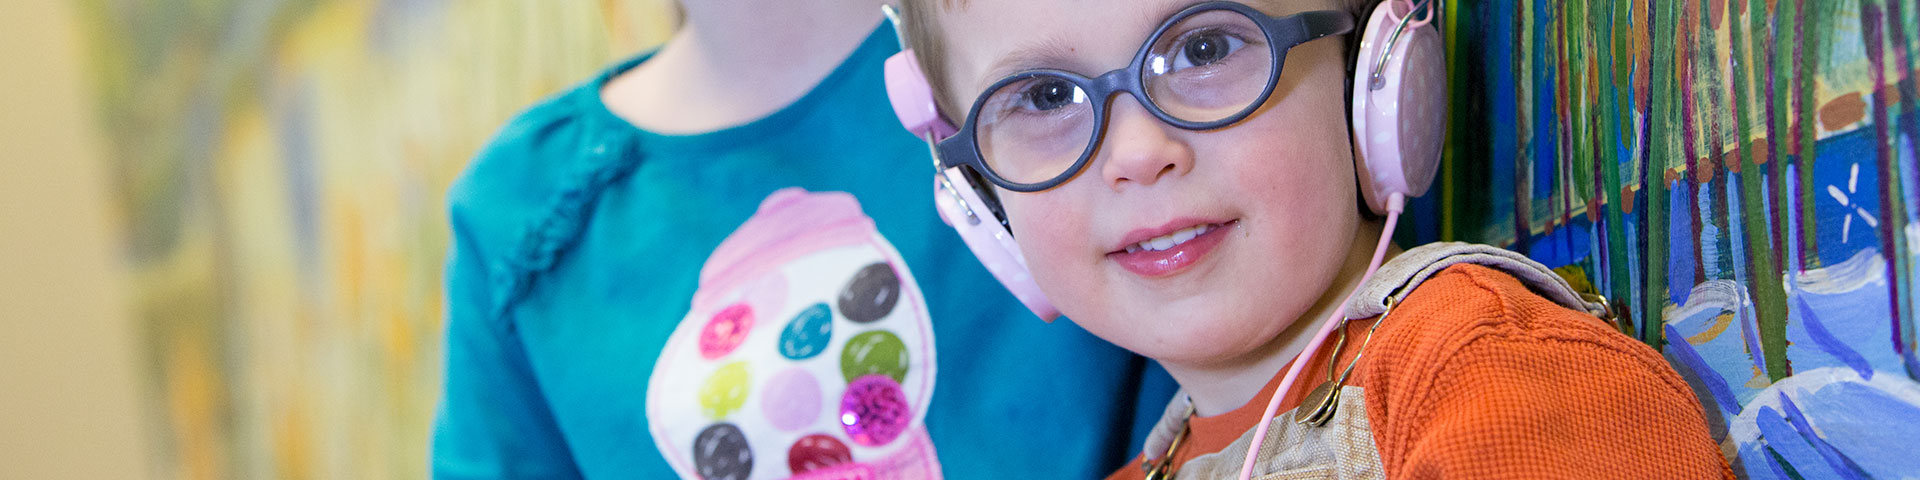 Child with headphones on, smiling, another child behind him.